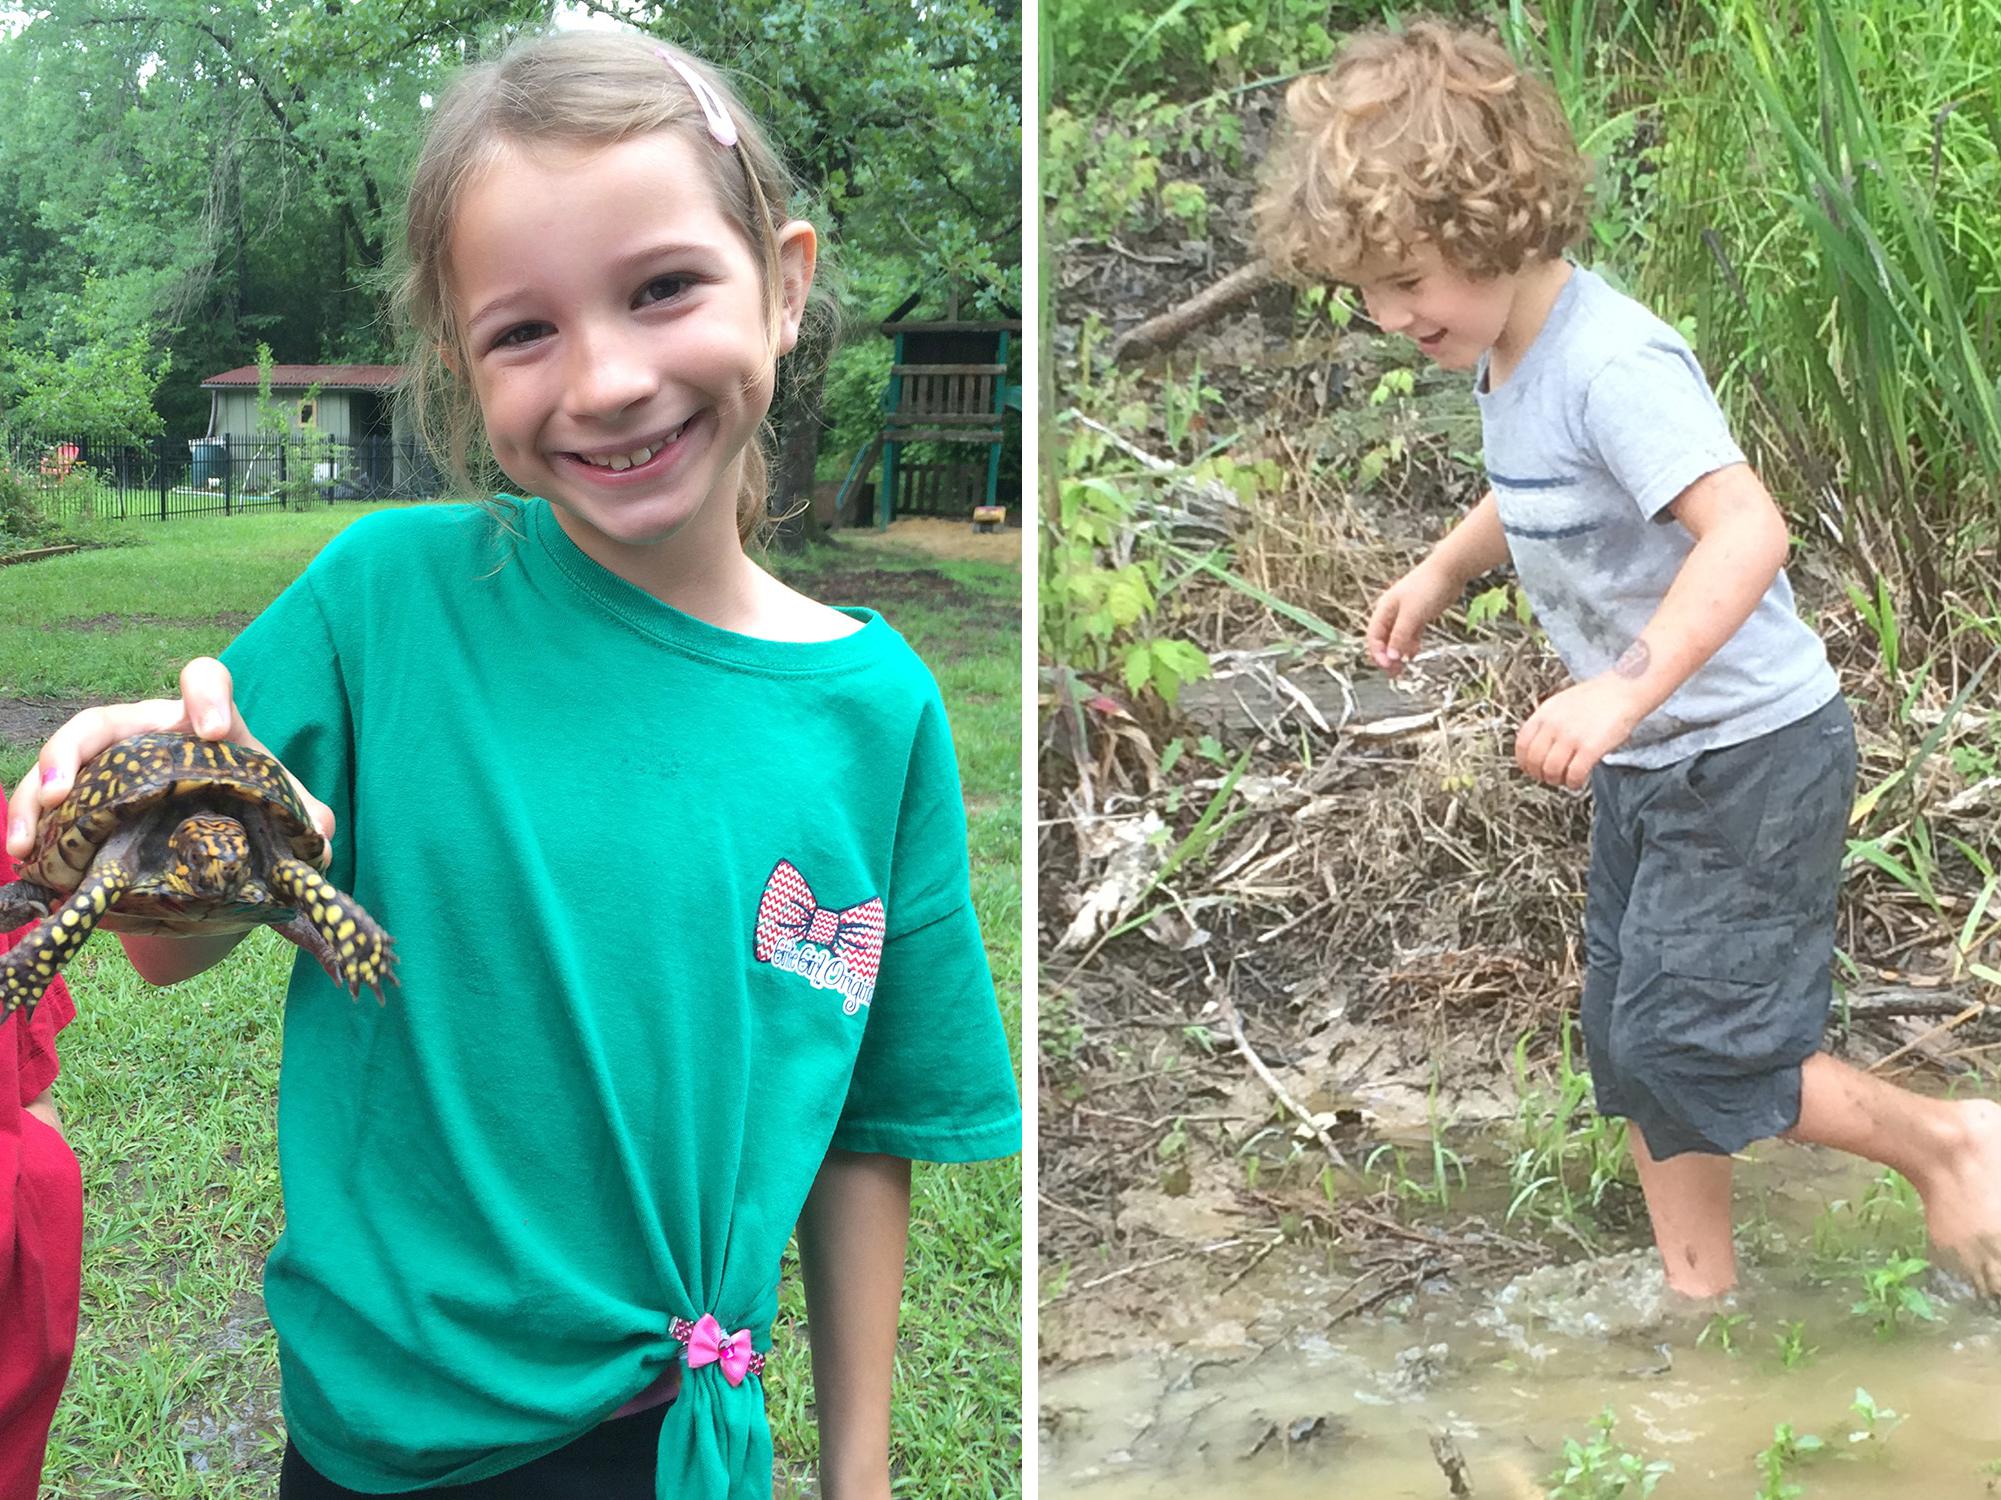 Children do not have to leave the city limits; they can explore nature in their own backyards. Eastern box turtles (left), which are native to Mississippi, are land dwellers and do not even need ponds to find friends who want to play. Getting dirty is half the fun for children exploring and playing in the great outdoors (right). Rain may drive families inside for a time, but they provide some great water features after the thunder and lightning have passed. (Photos by MSU Extension Service/Evan O’Donnell)